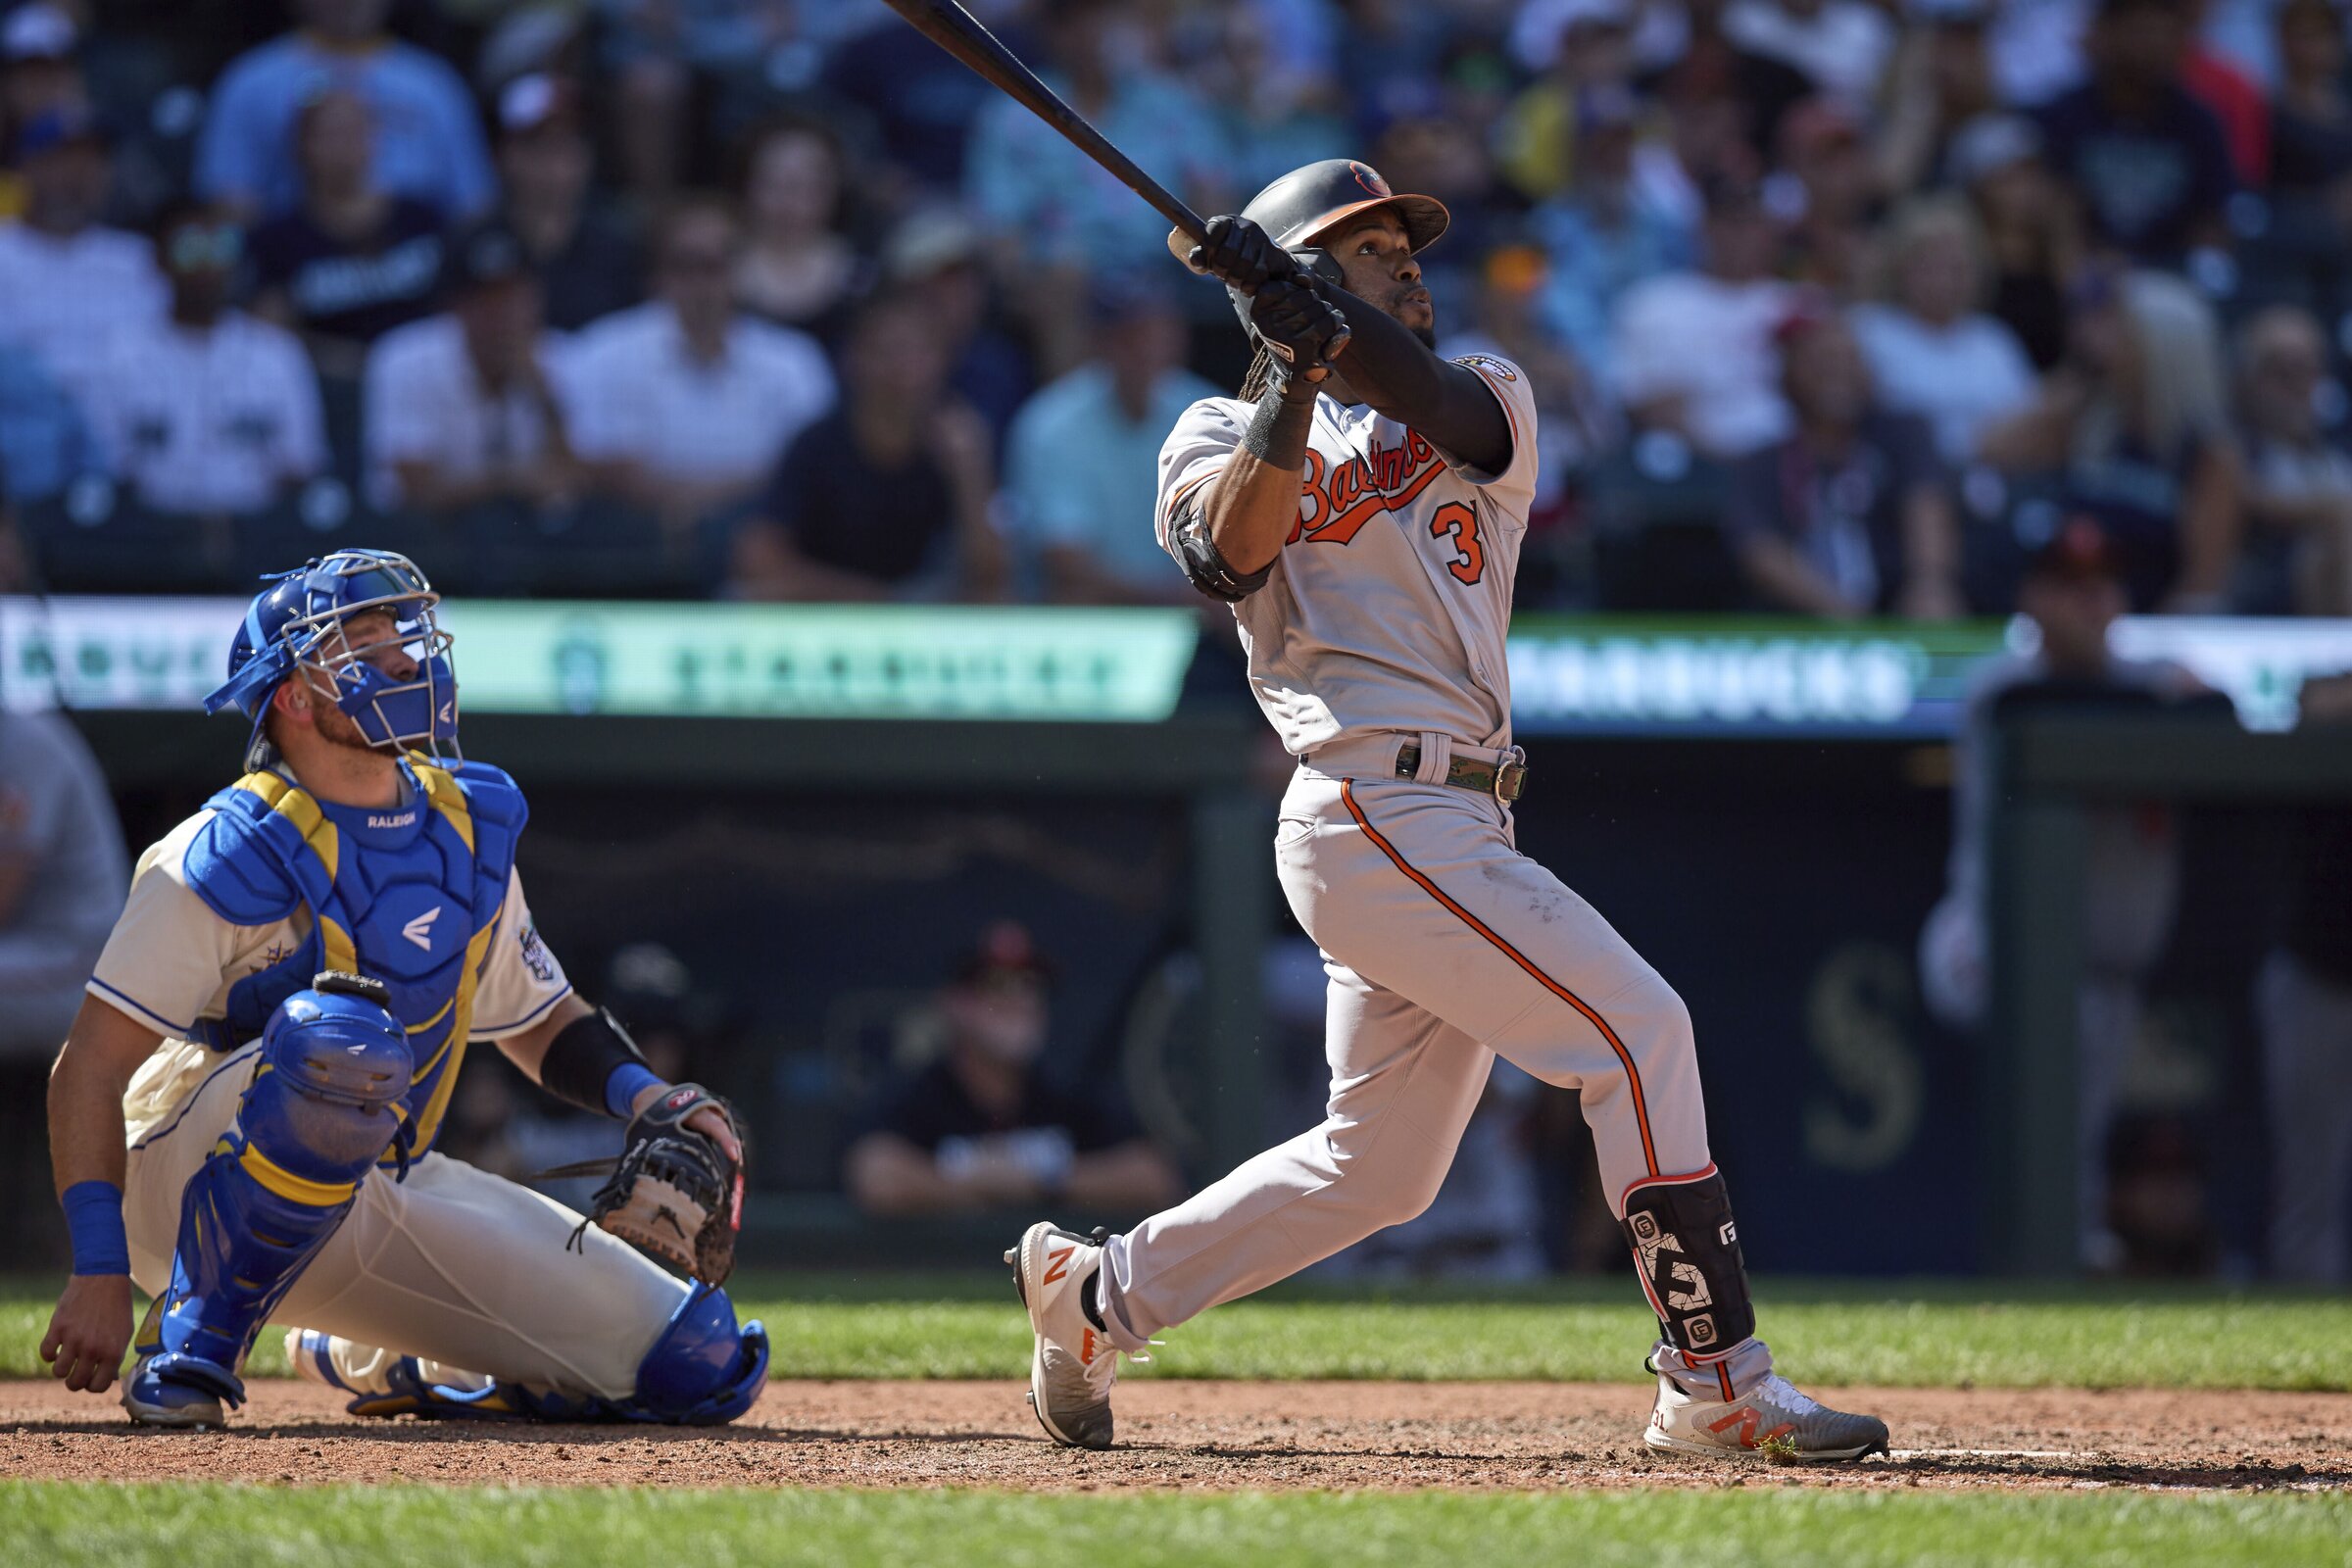 Orioles Hit Six Home Runs, Complete Sweep Of Twins